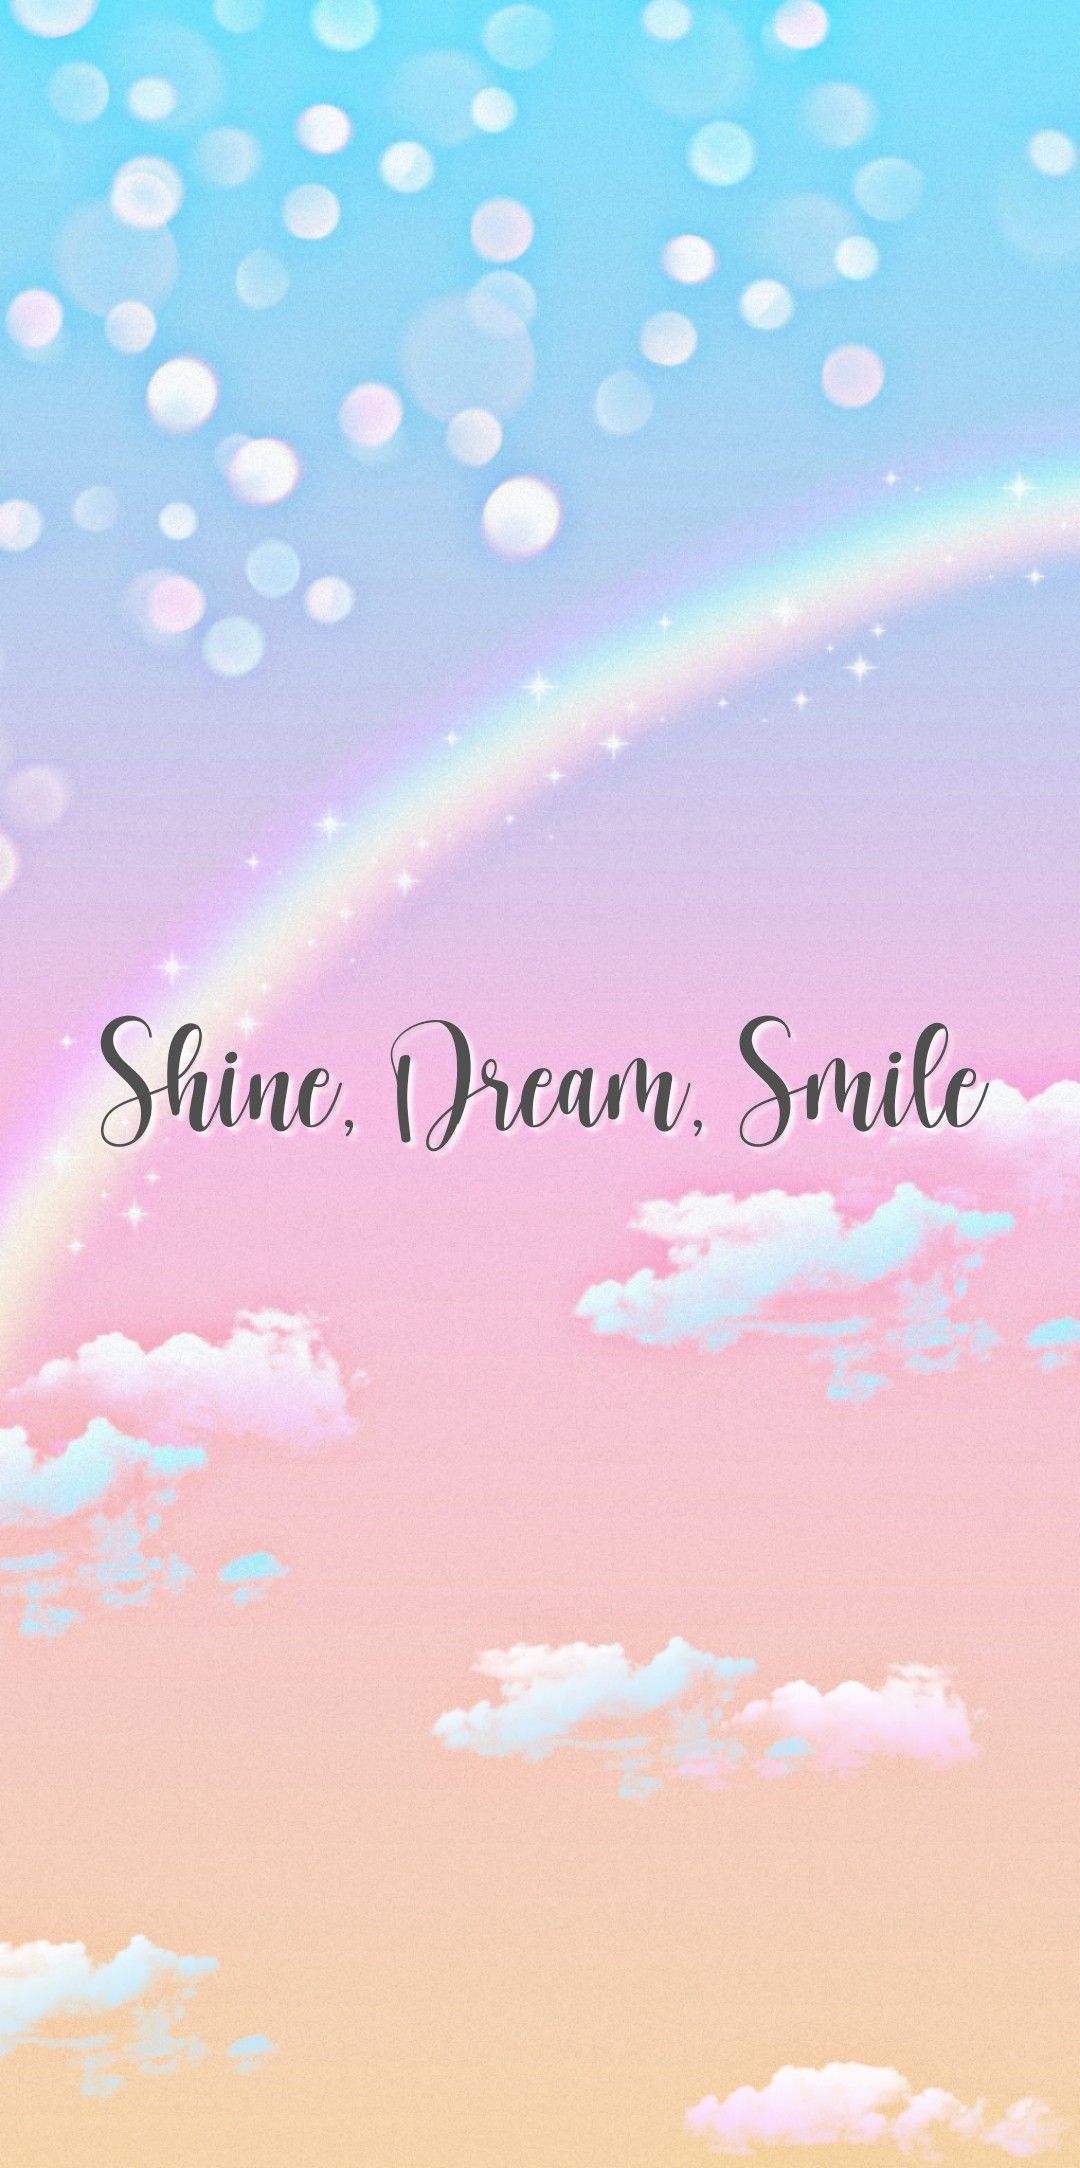 Aesthetic wallpaper for phone with rainbow, clouds and the words 